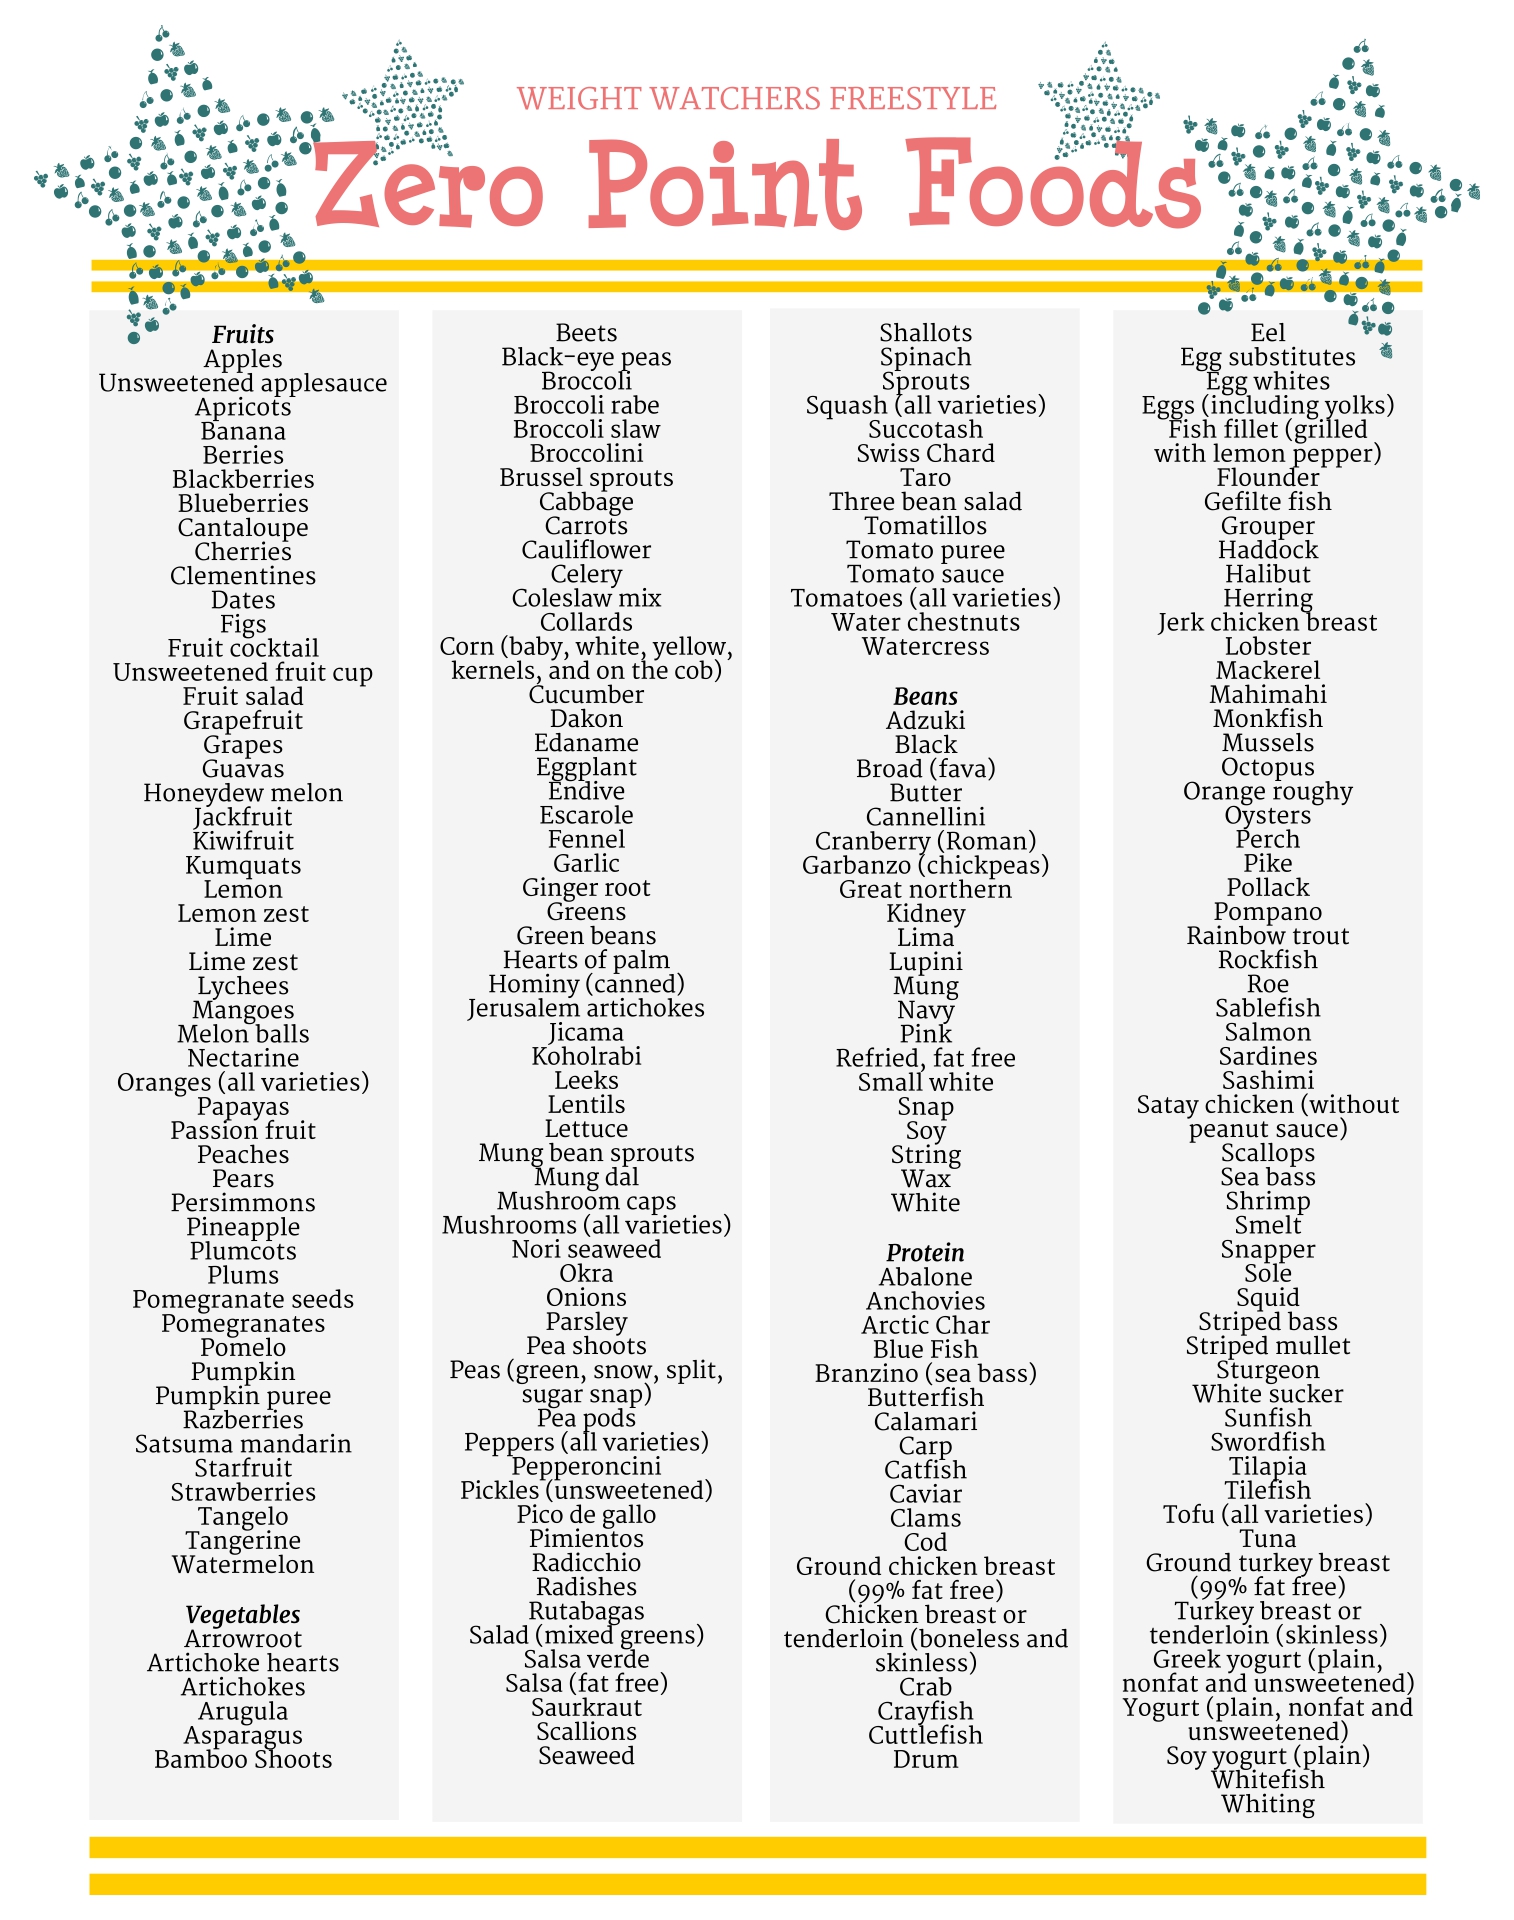 Printable Old Weight Watchers Food List